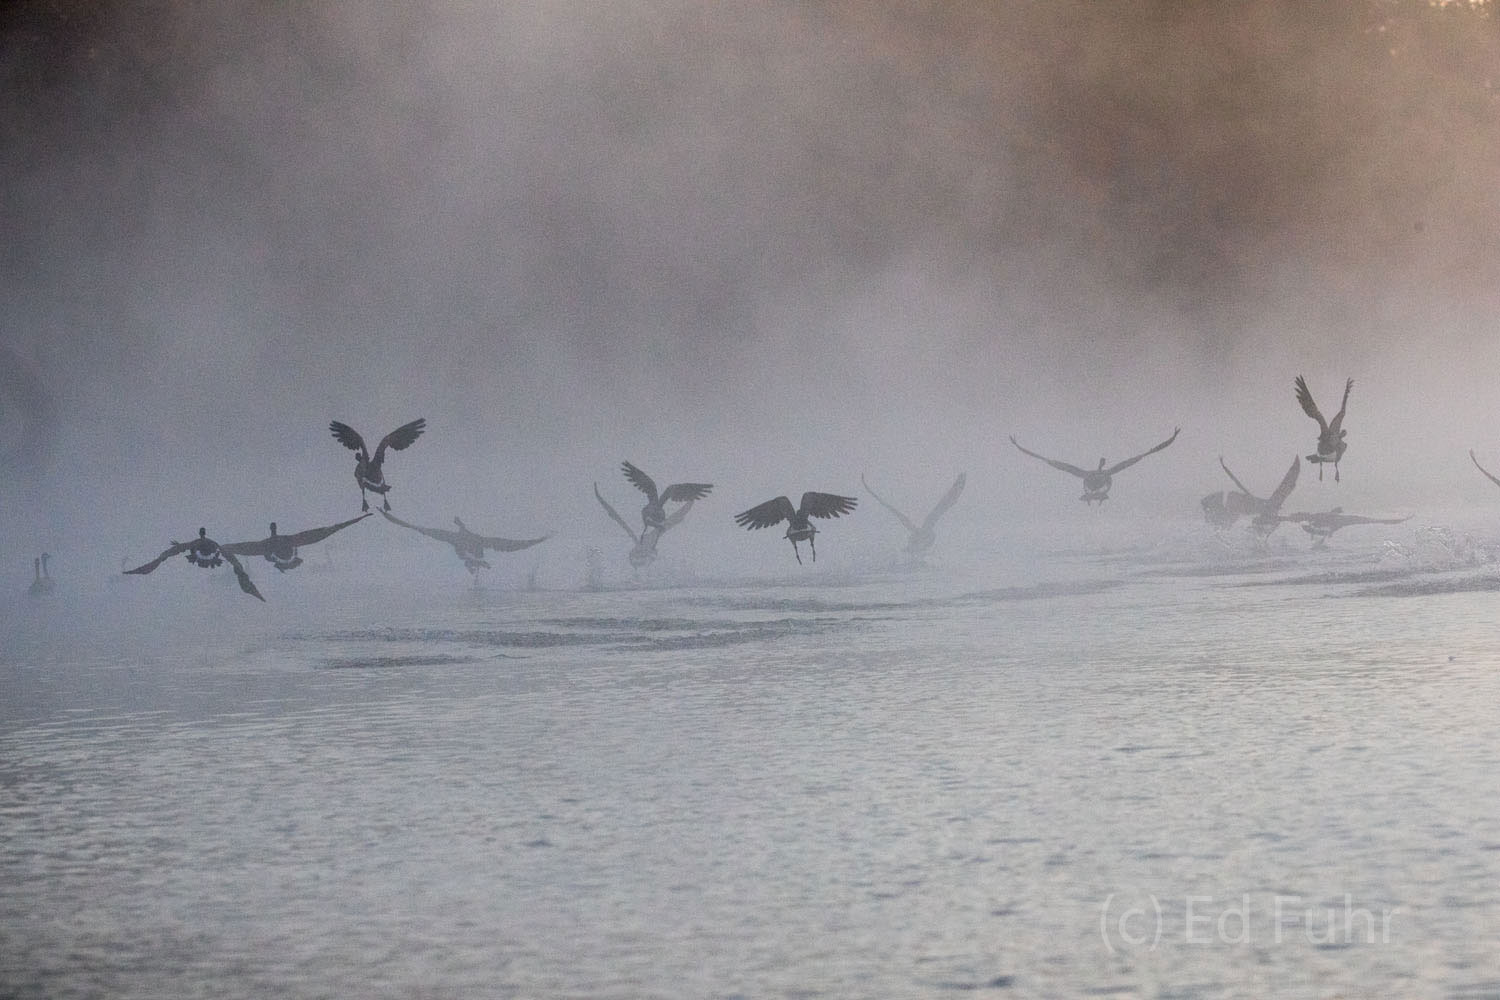 Dozens of geese lift off in the fog.